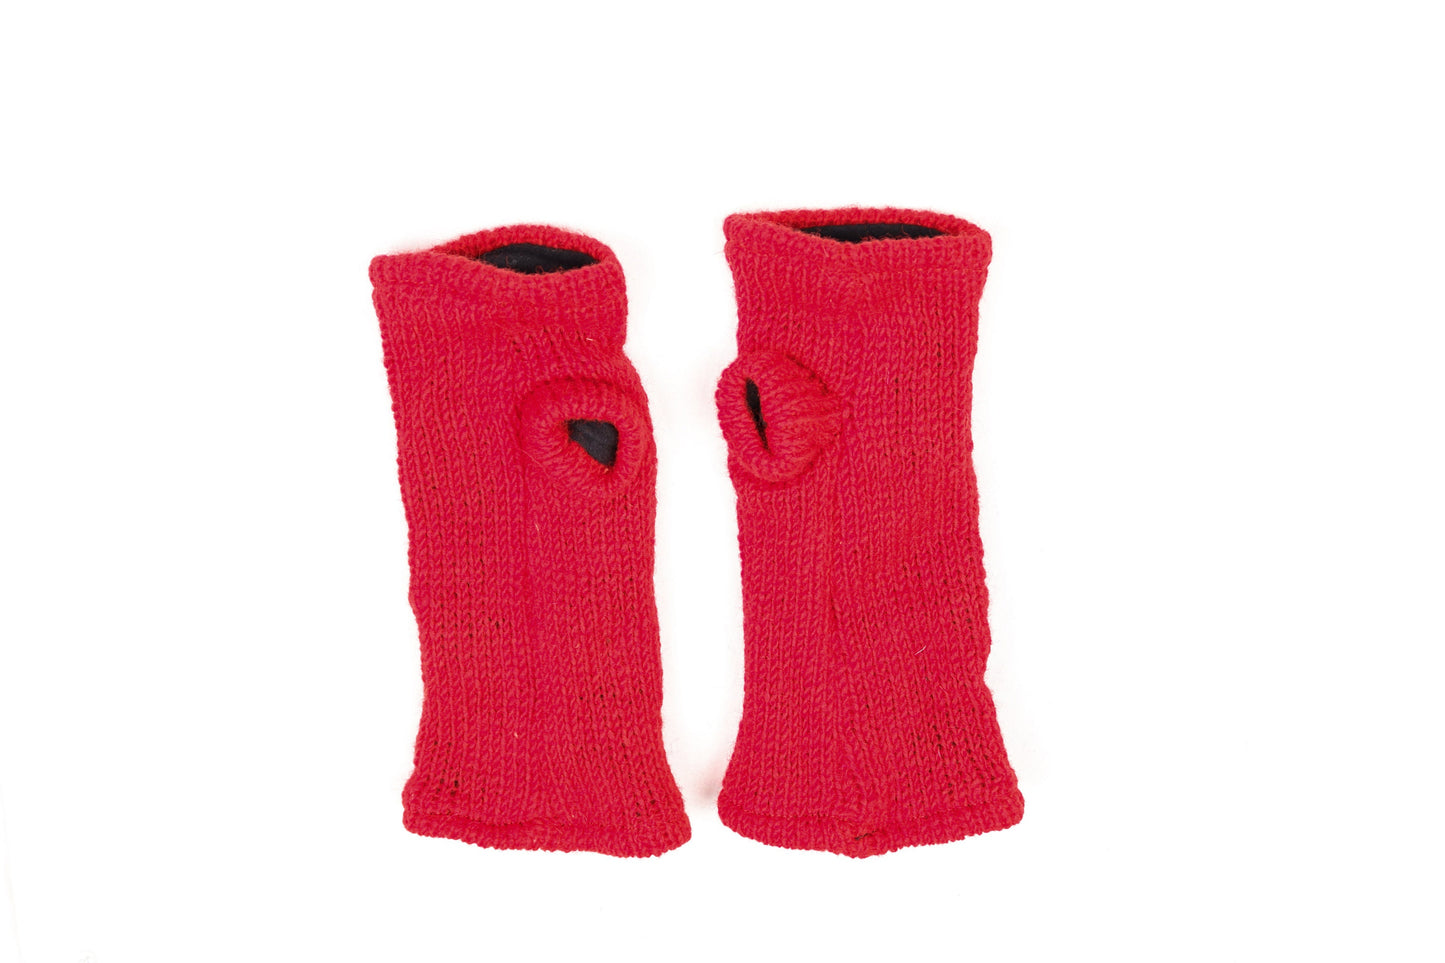 Fleece Lined Knitted Wrist Warmers - Red - Bare Canvas